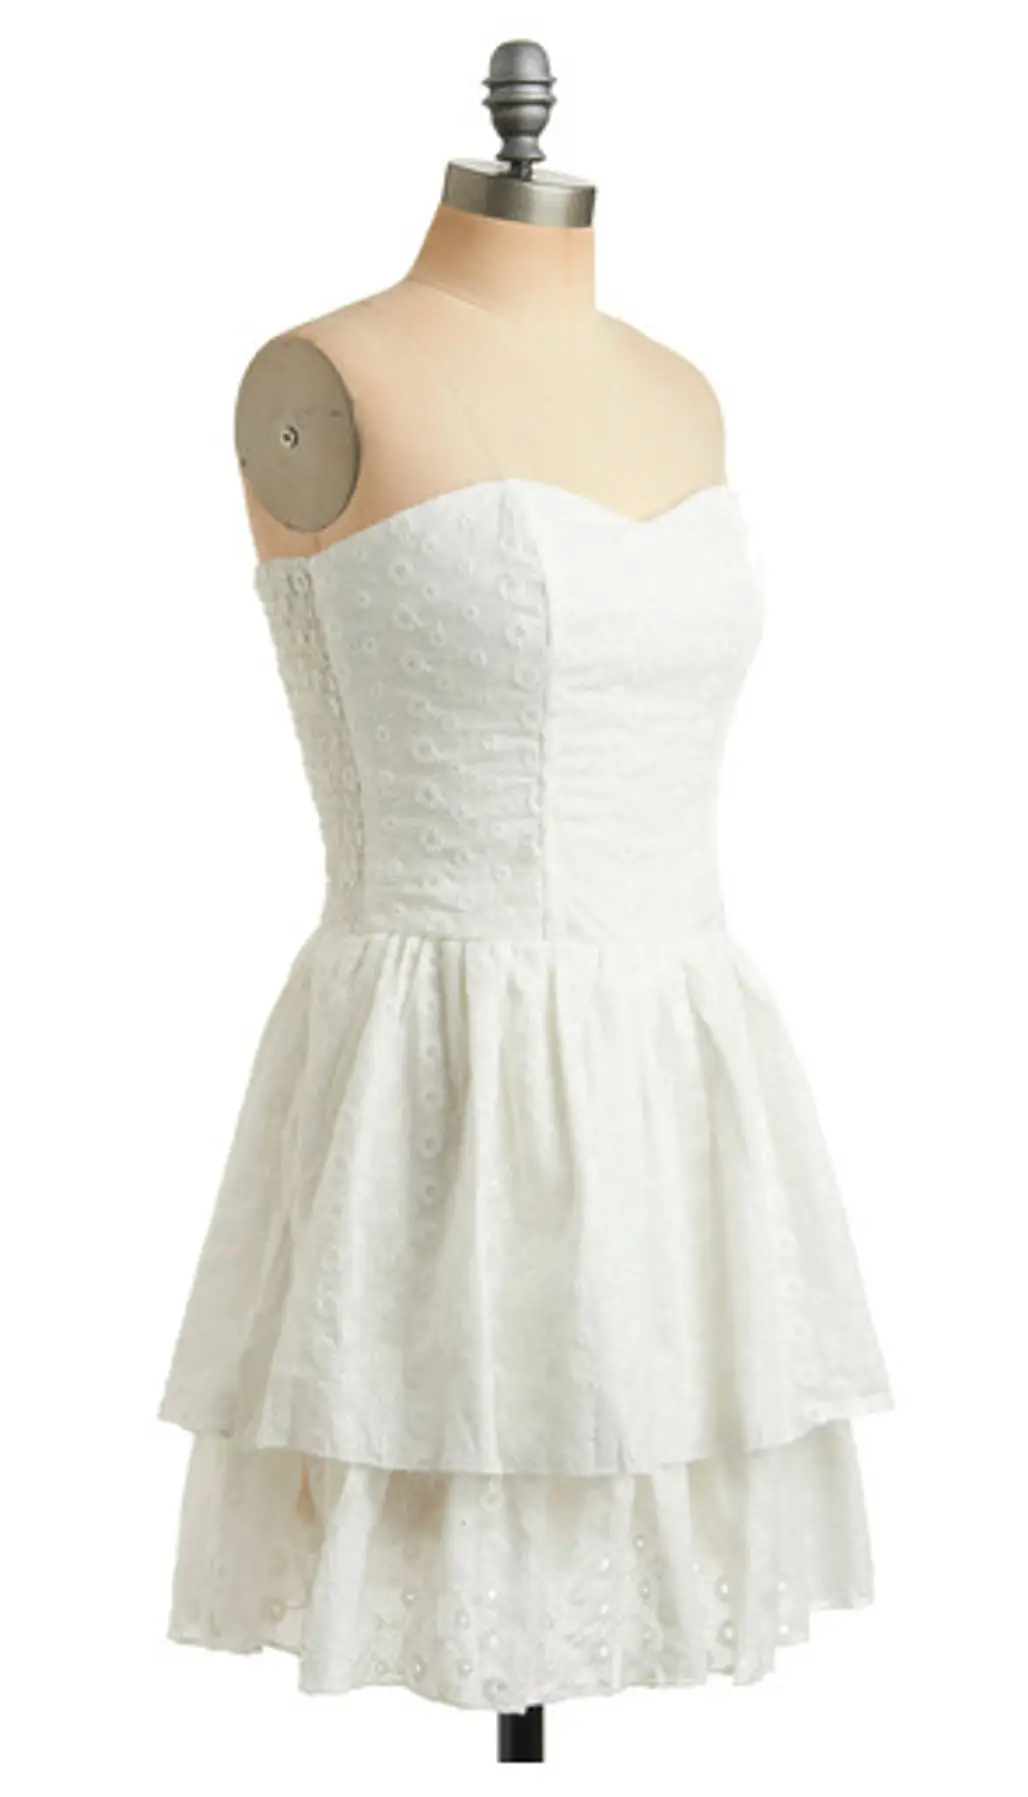 Catch Your Eyelet Dress